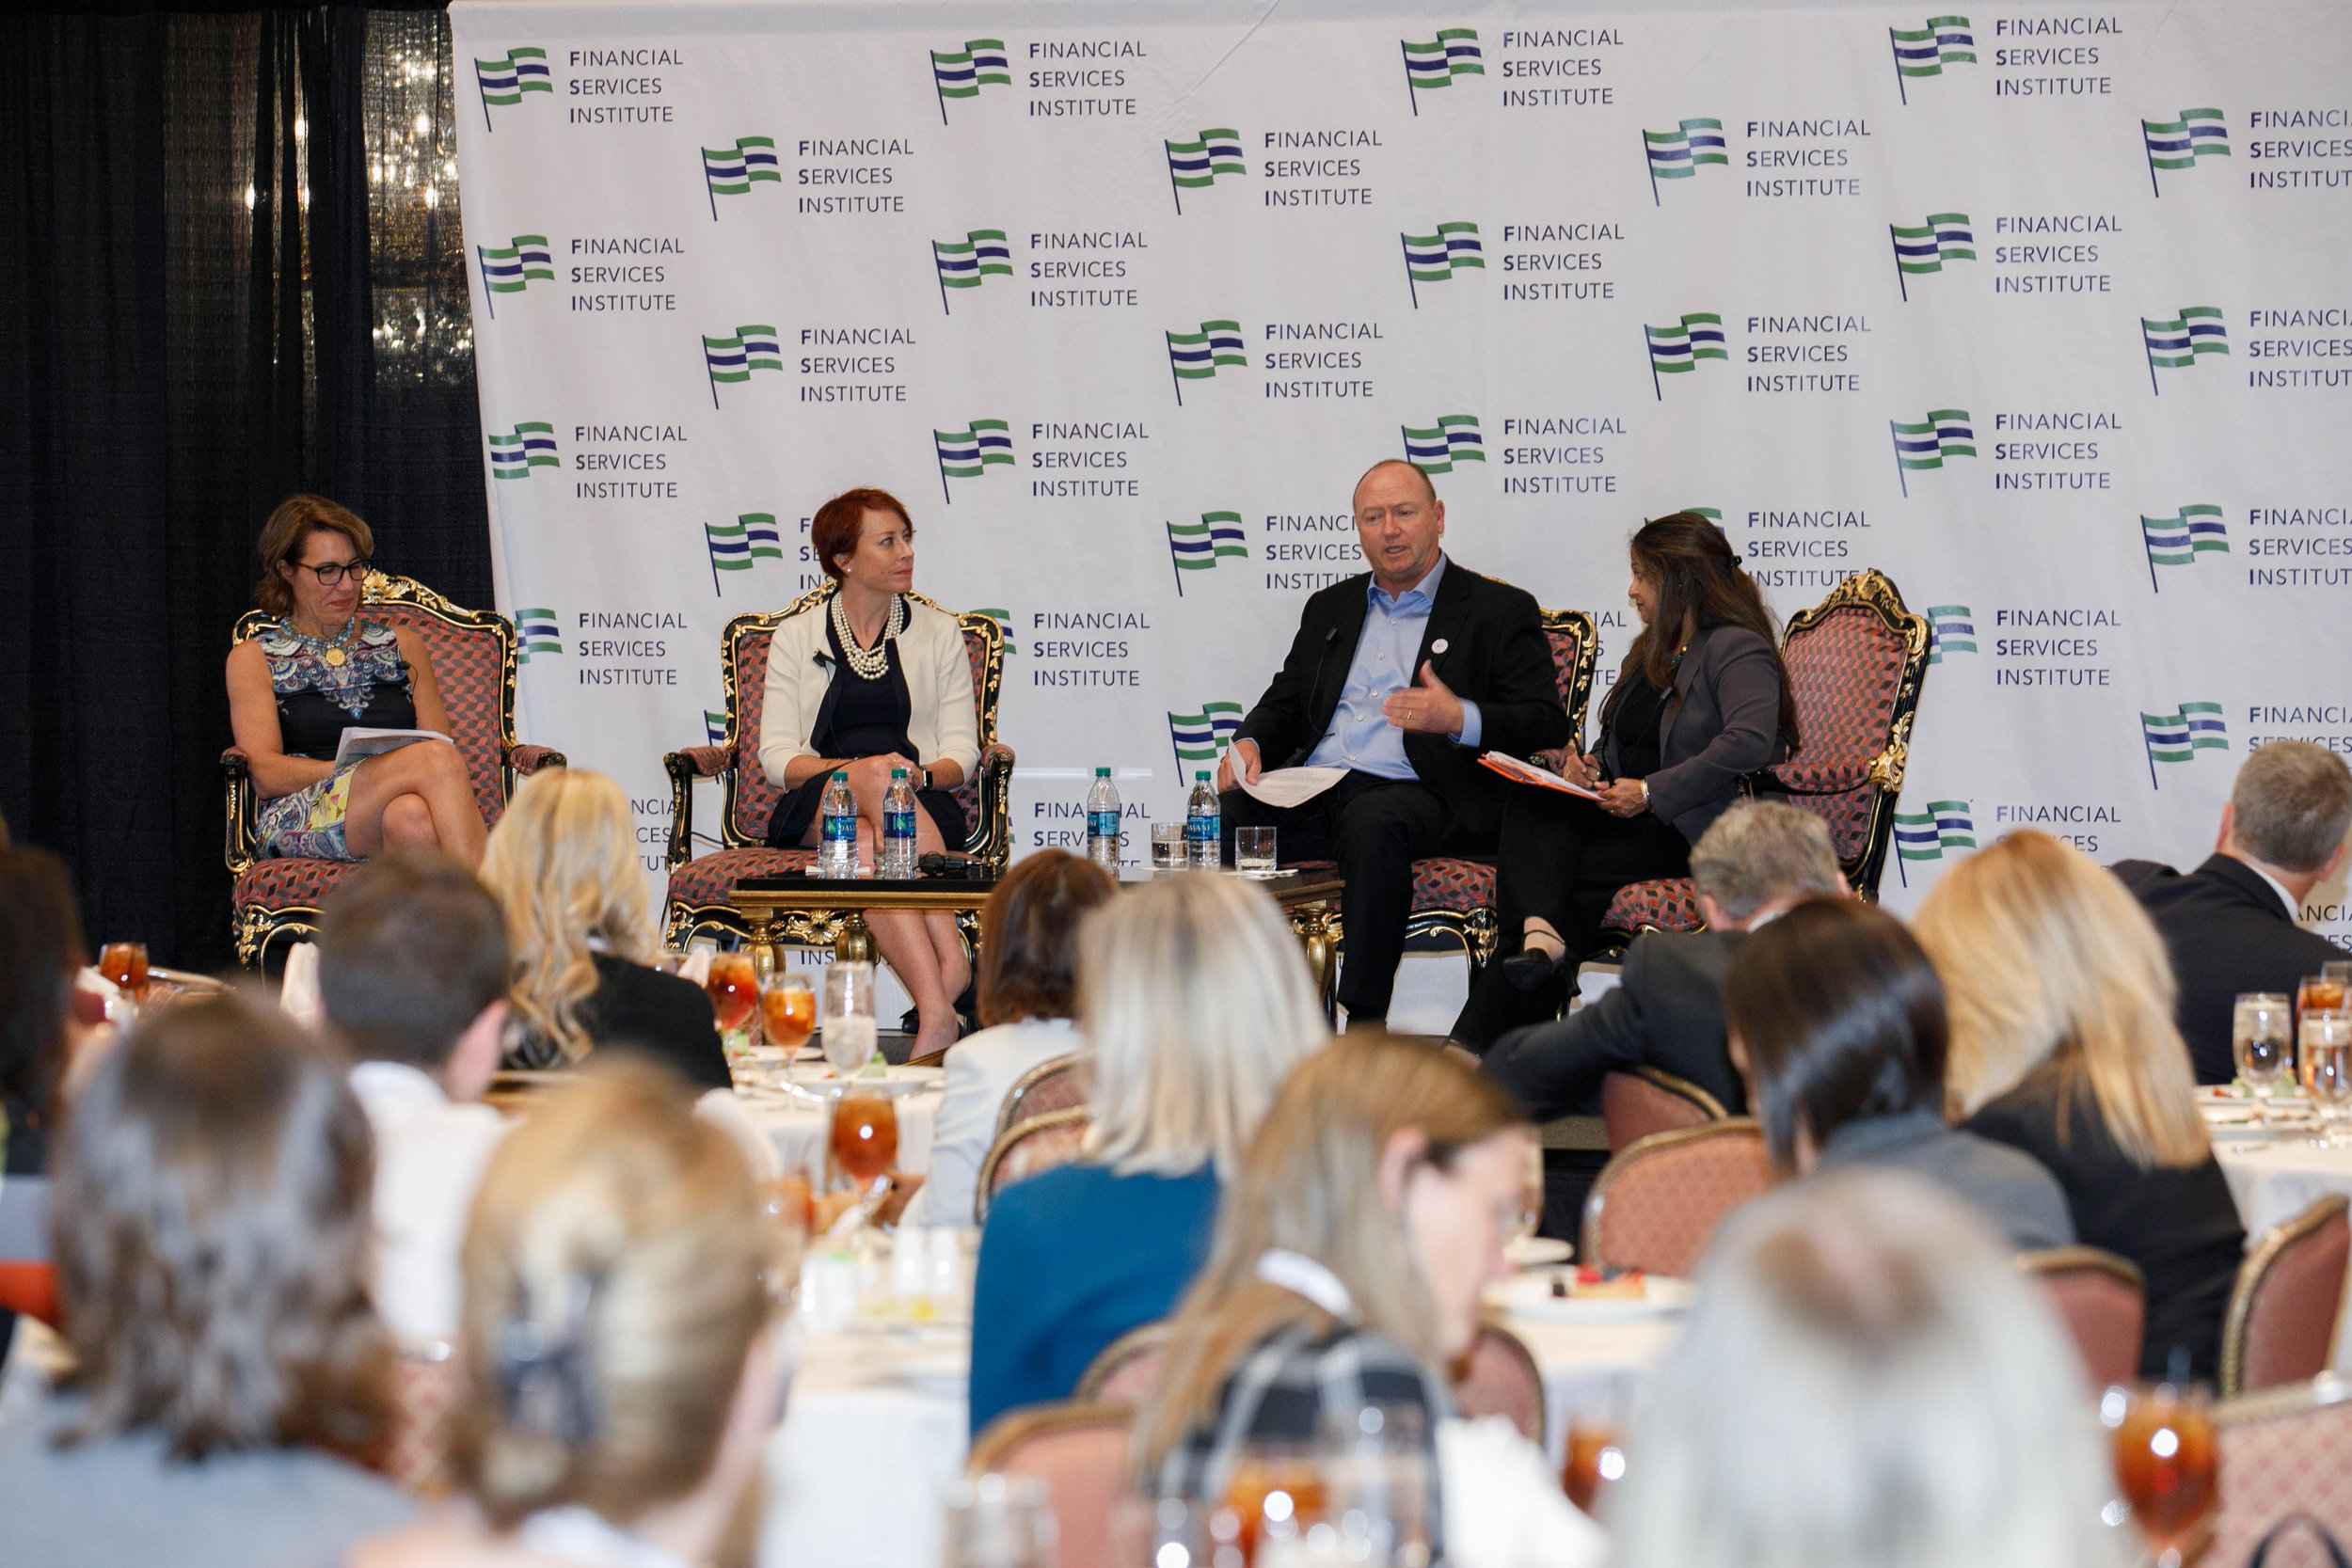  Advancing Women in Leadership Workshop panel discussion at Financial Services Institute (FSI) Forum 2018 in Salt Lake City, UT. Pictured left to right, Samantha O’Neil, Amy Philbrook, Thomas Goodson and Sarita Bhagwat. Photo Credit:  Kinser Studios 